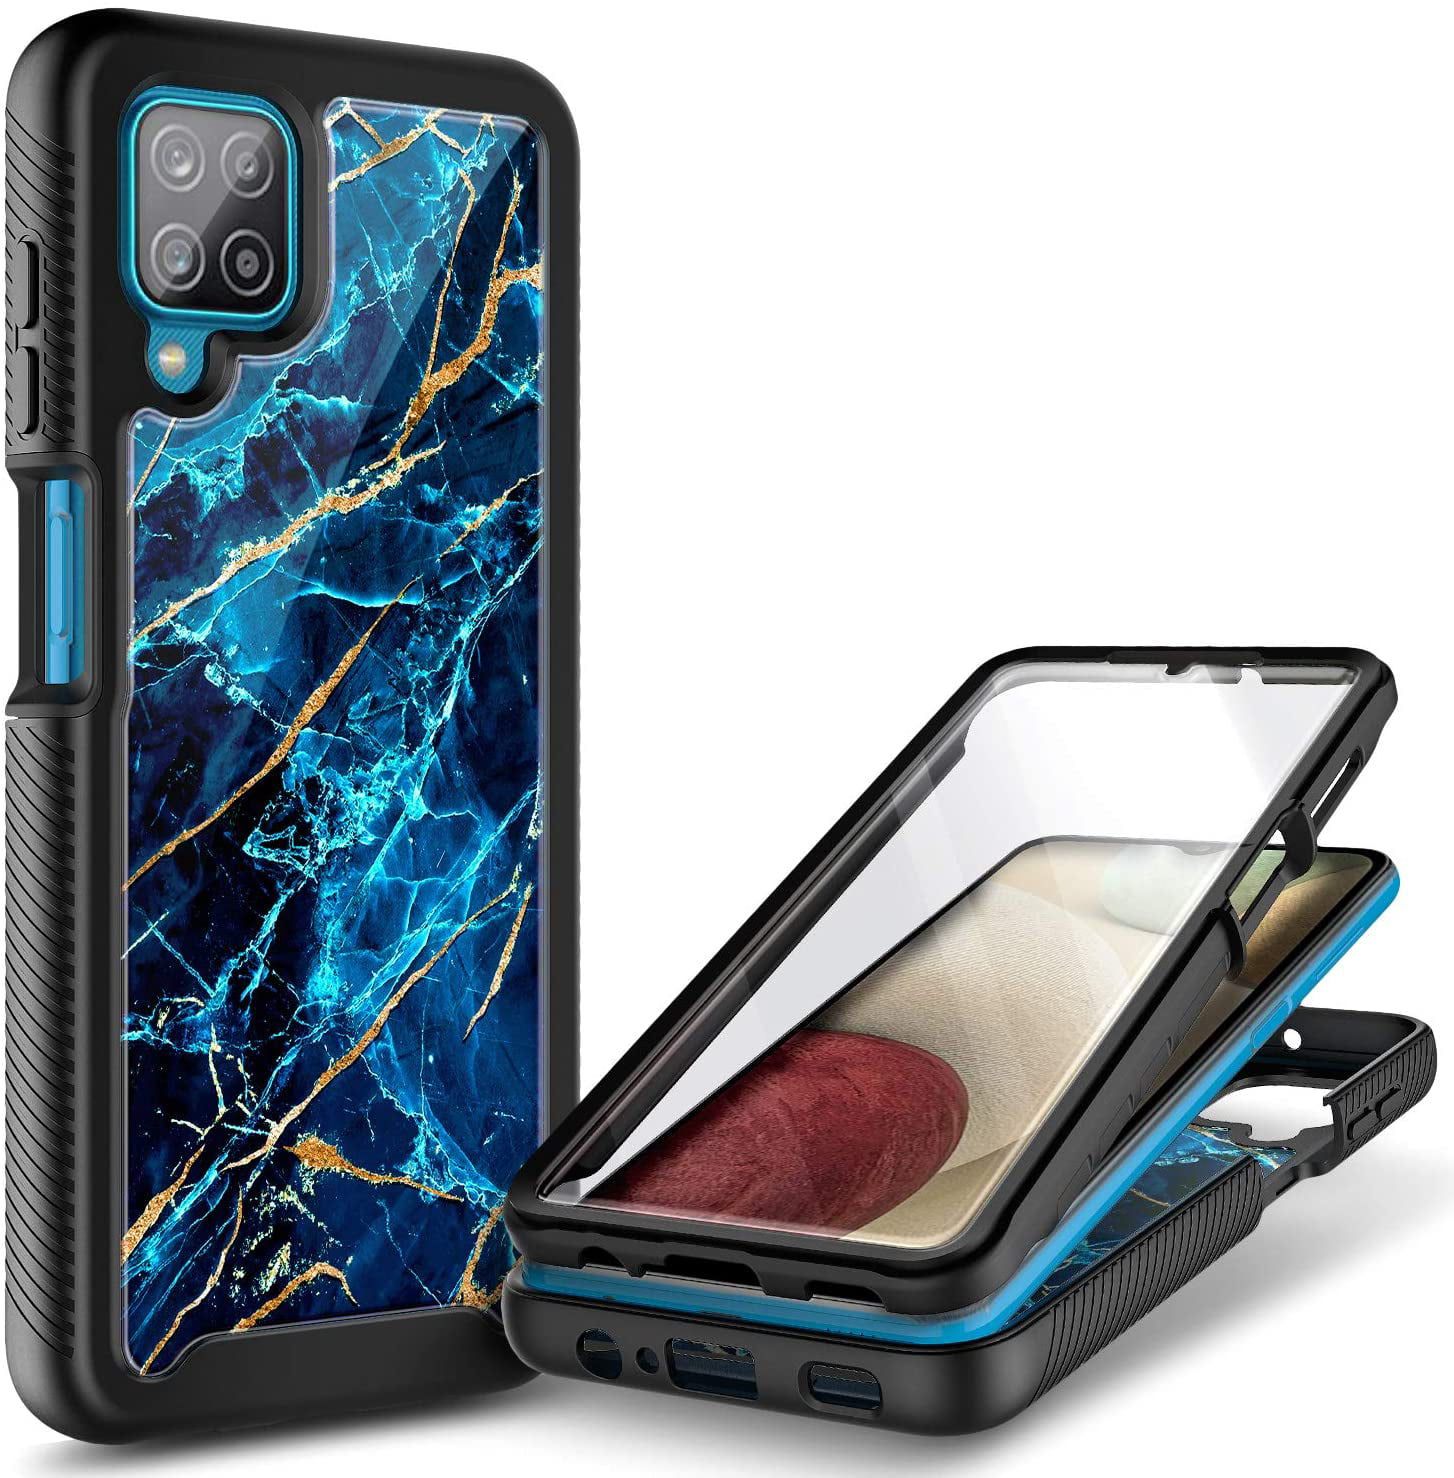 Digital Camo Shockproof Rugged Dual Layered Cover w/Stand Case Compatible with Apple iPhone X Impact-Resist 